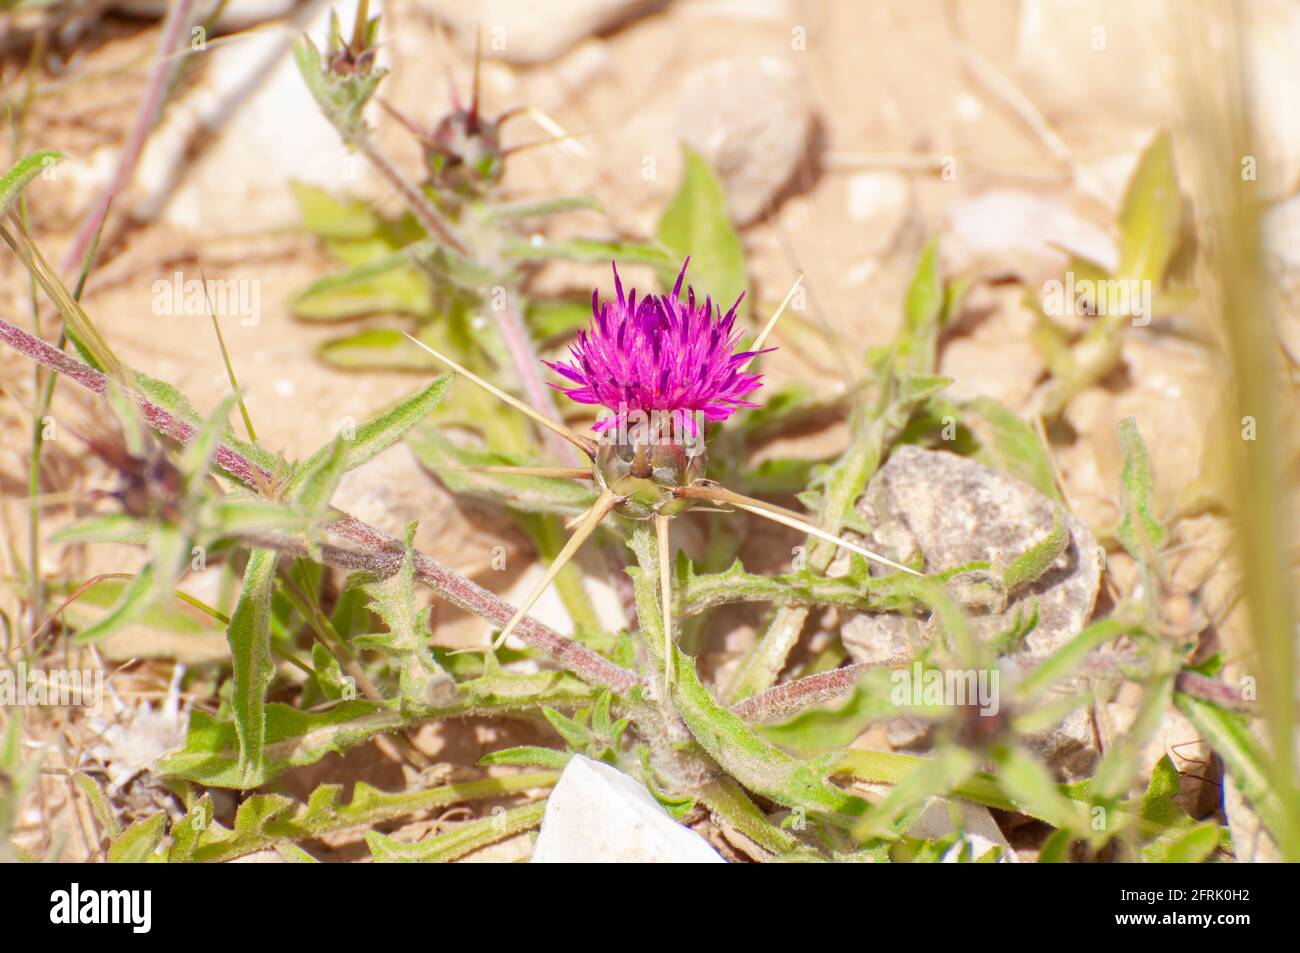 Star thistle (Centaurea calcitrapa) flower. Photographed in Israel in March Stock Photo